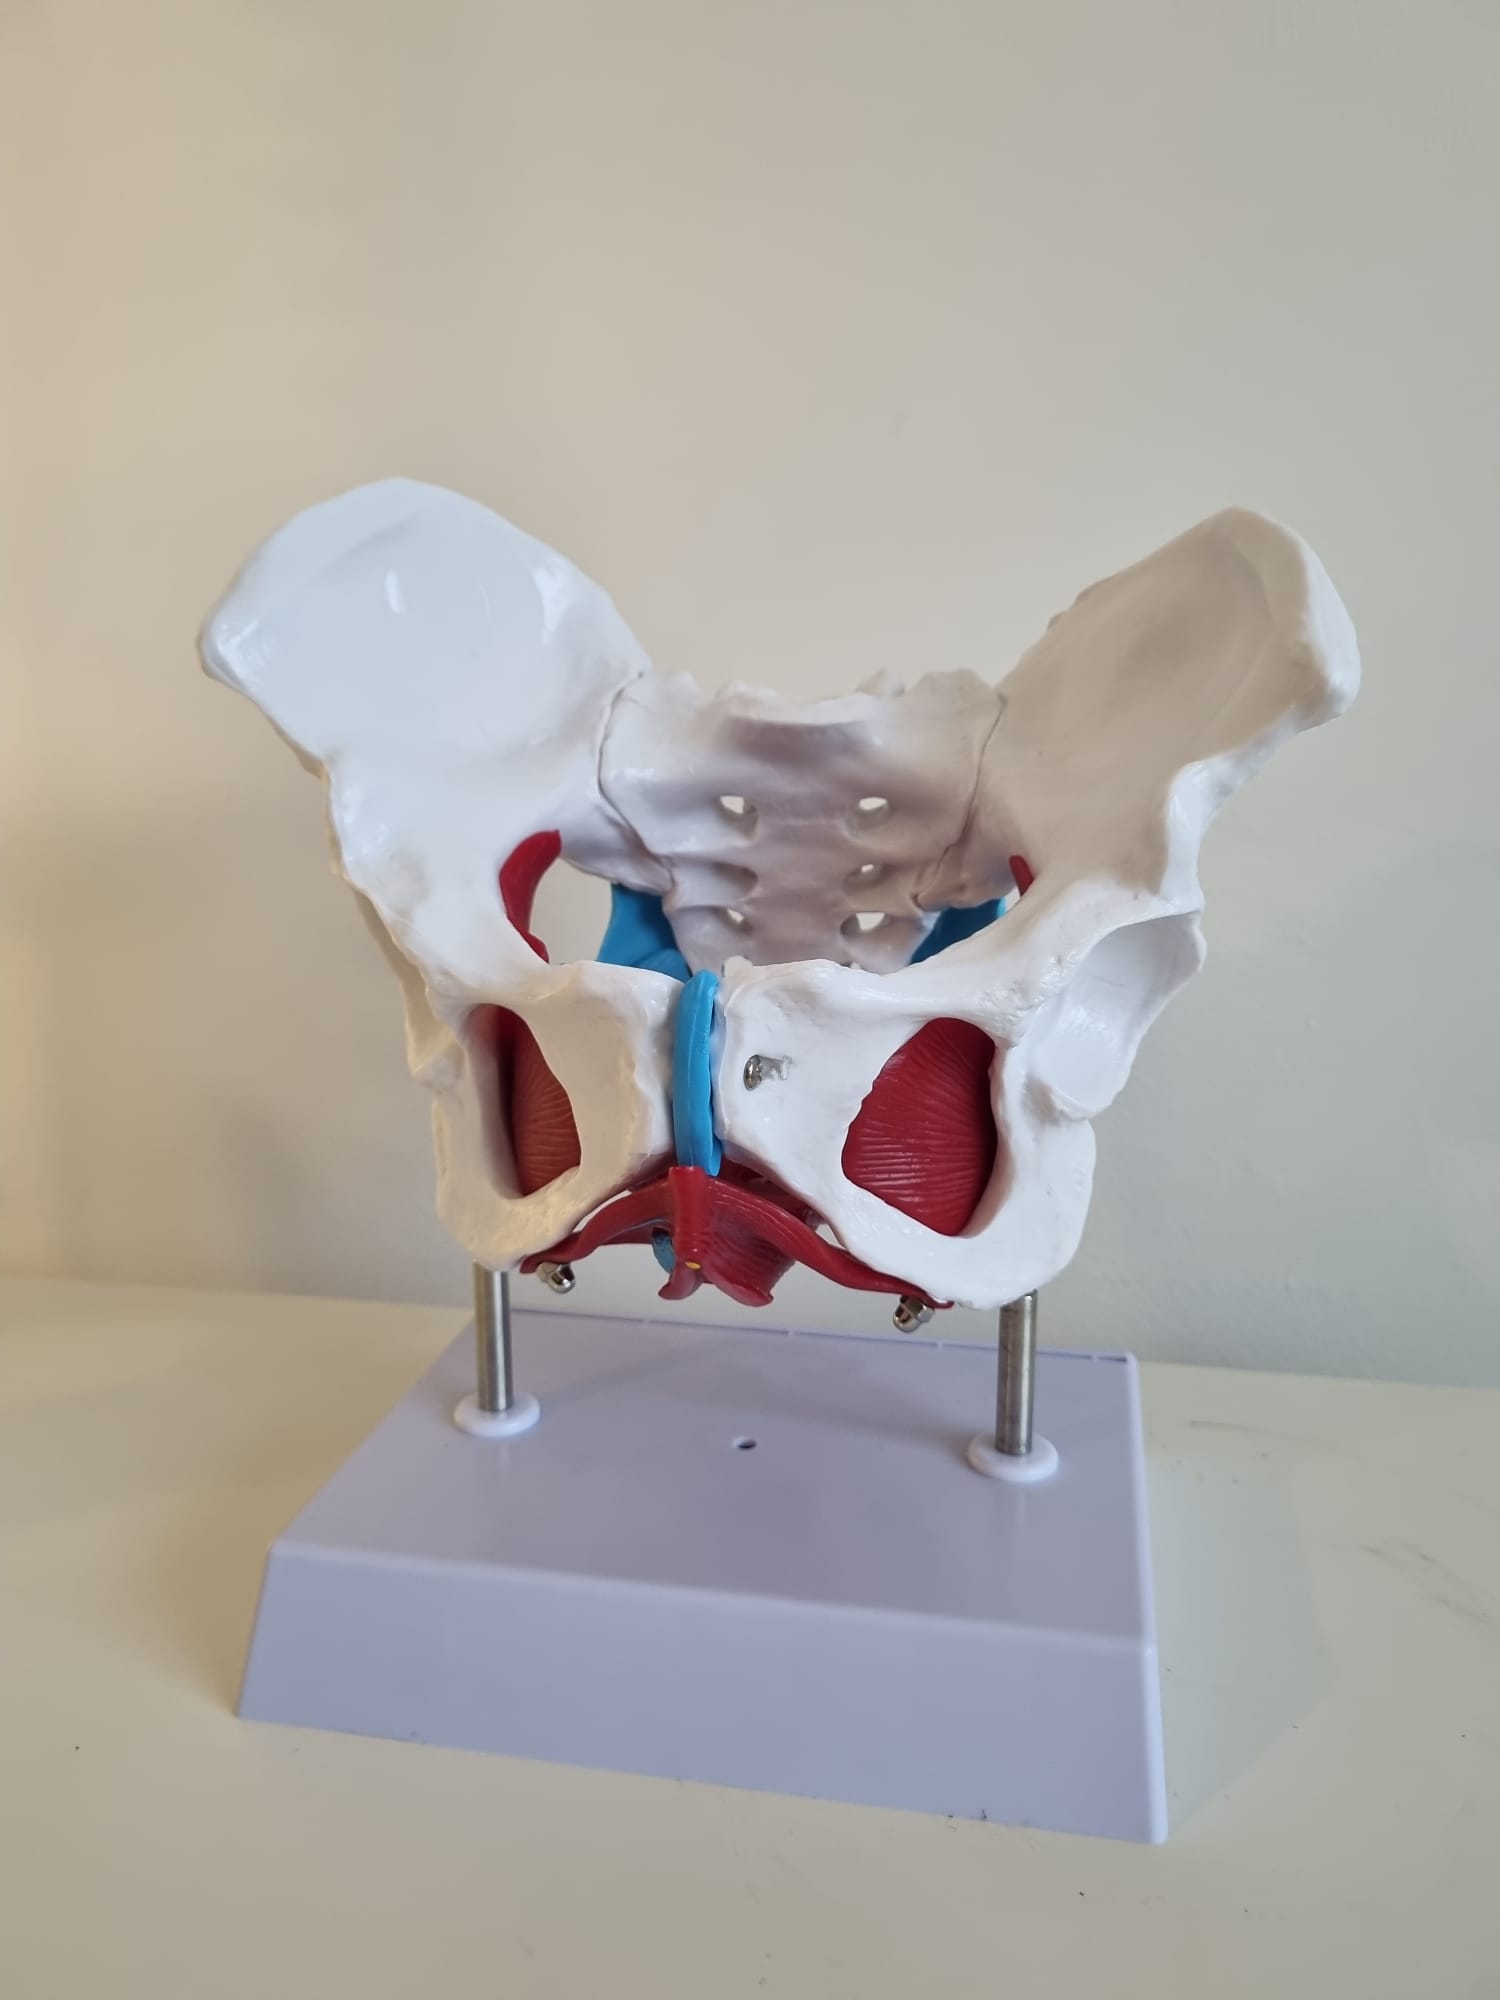 Image of a pelvis depicting the area of womens pelvic health